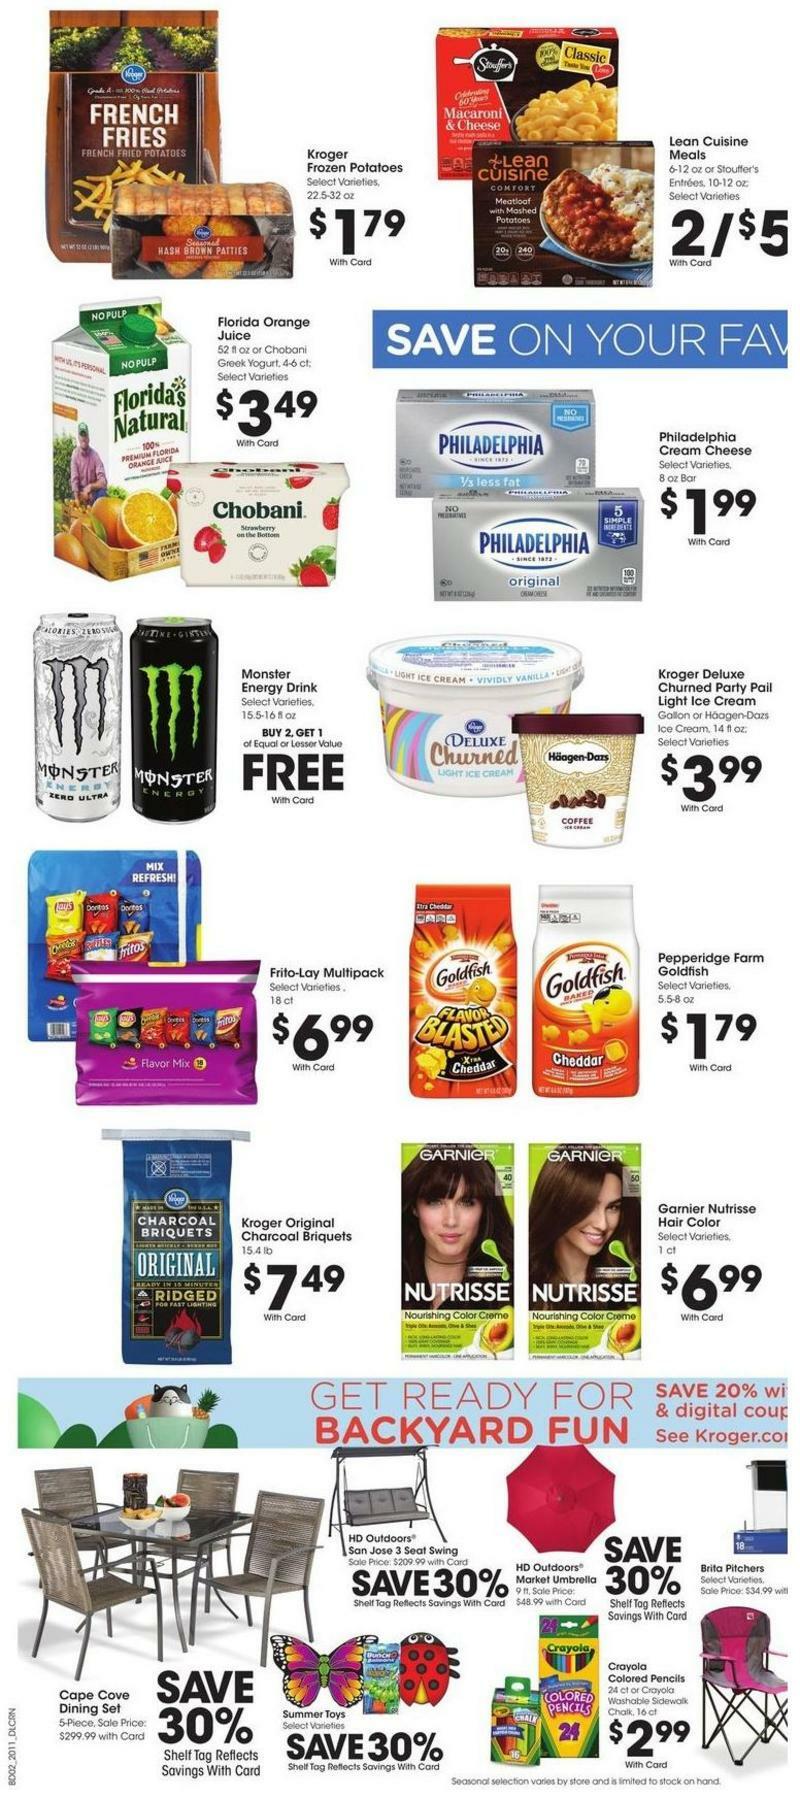 Kroger Weekly Ad from April 15